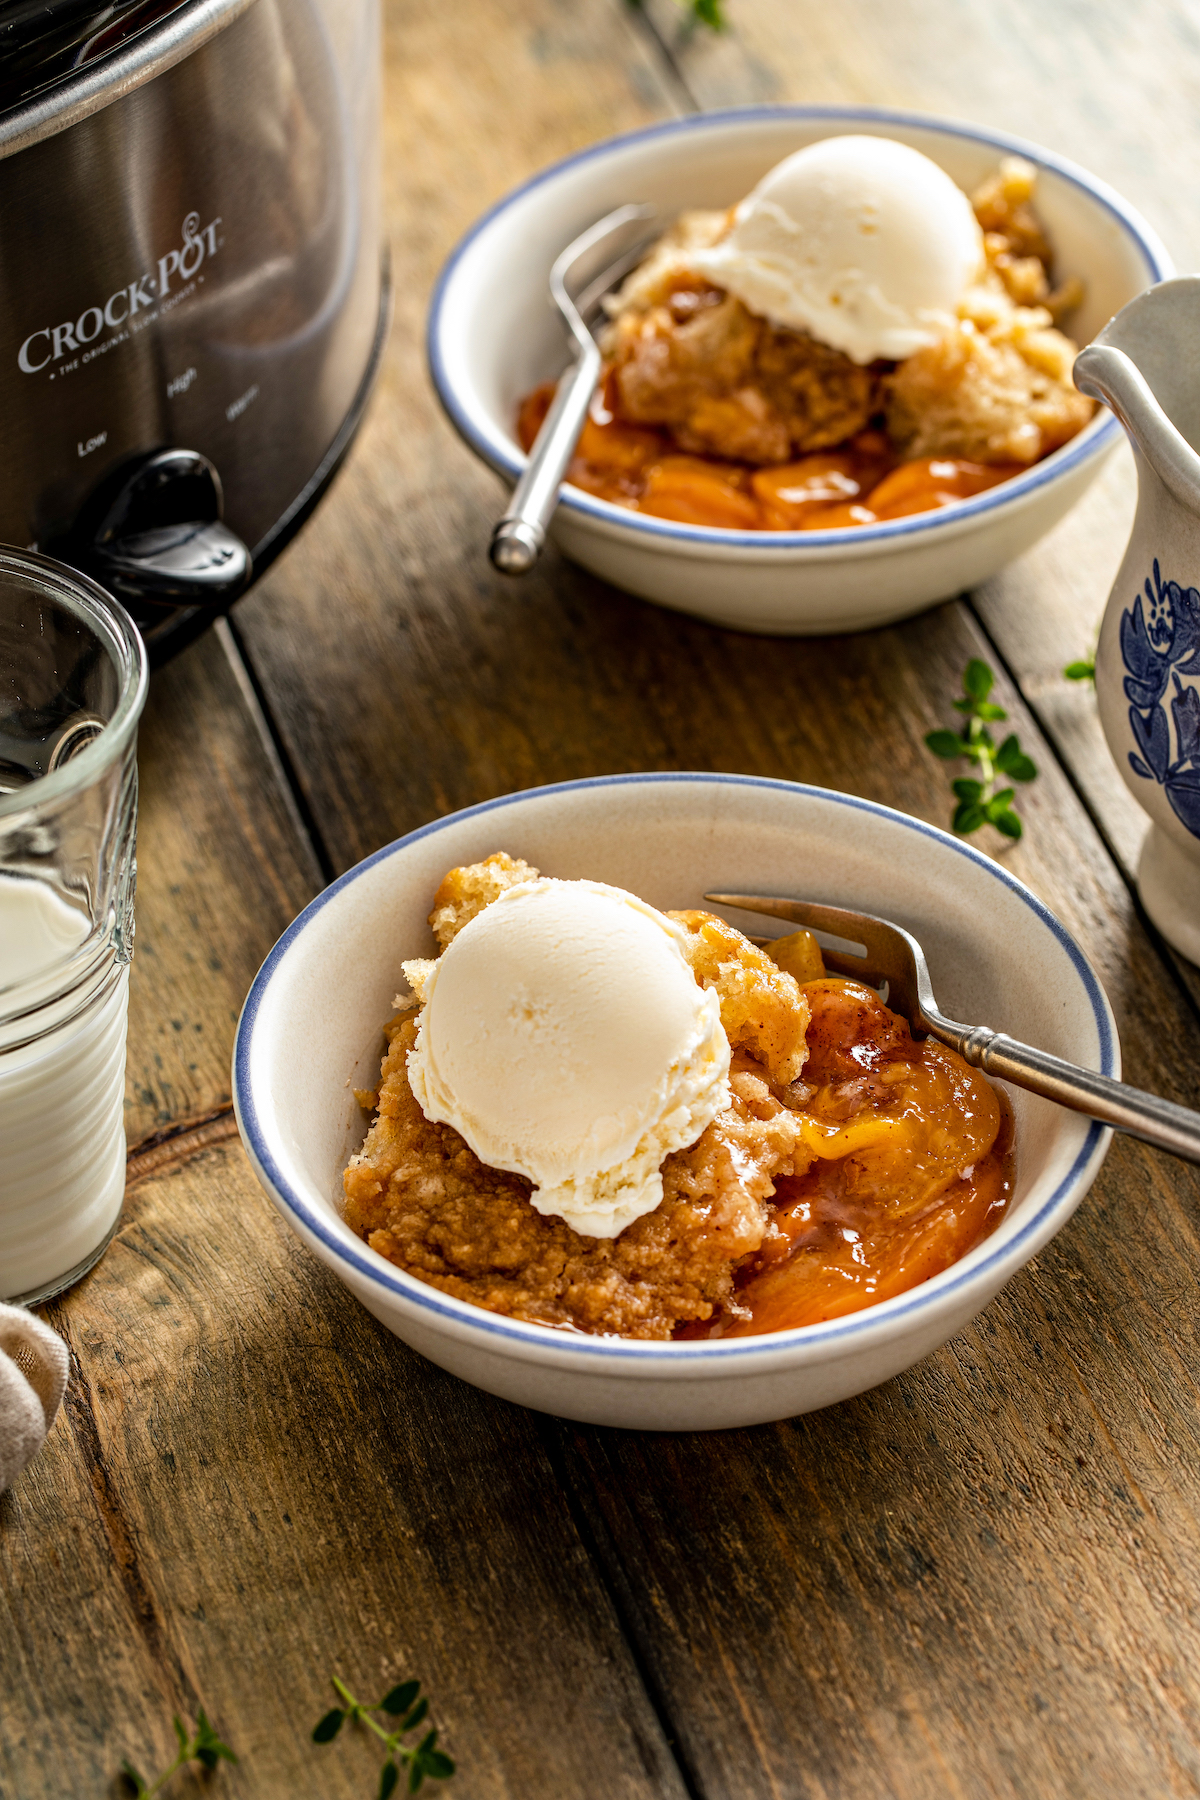 Two bowls of crockpot peach cobbler servings topped with vanilla ice cream, on a wooden tabletop.